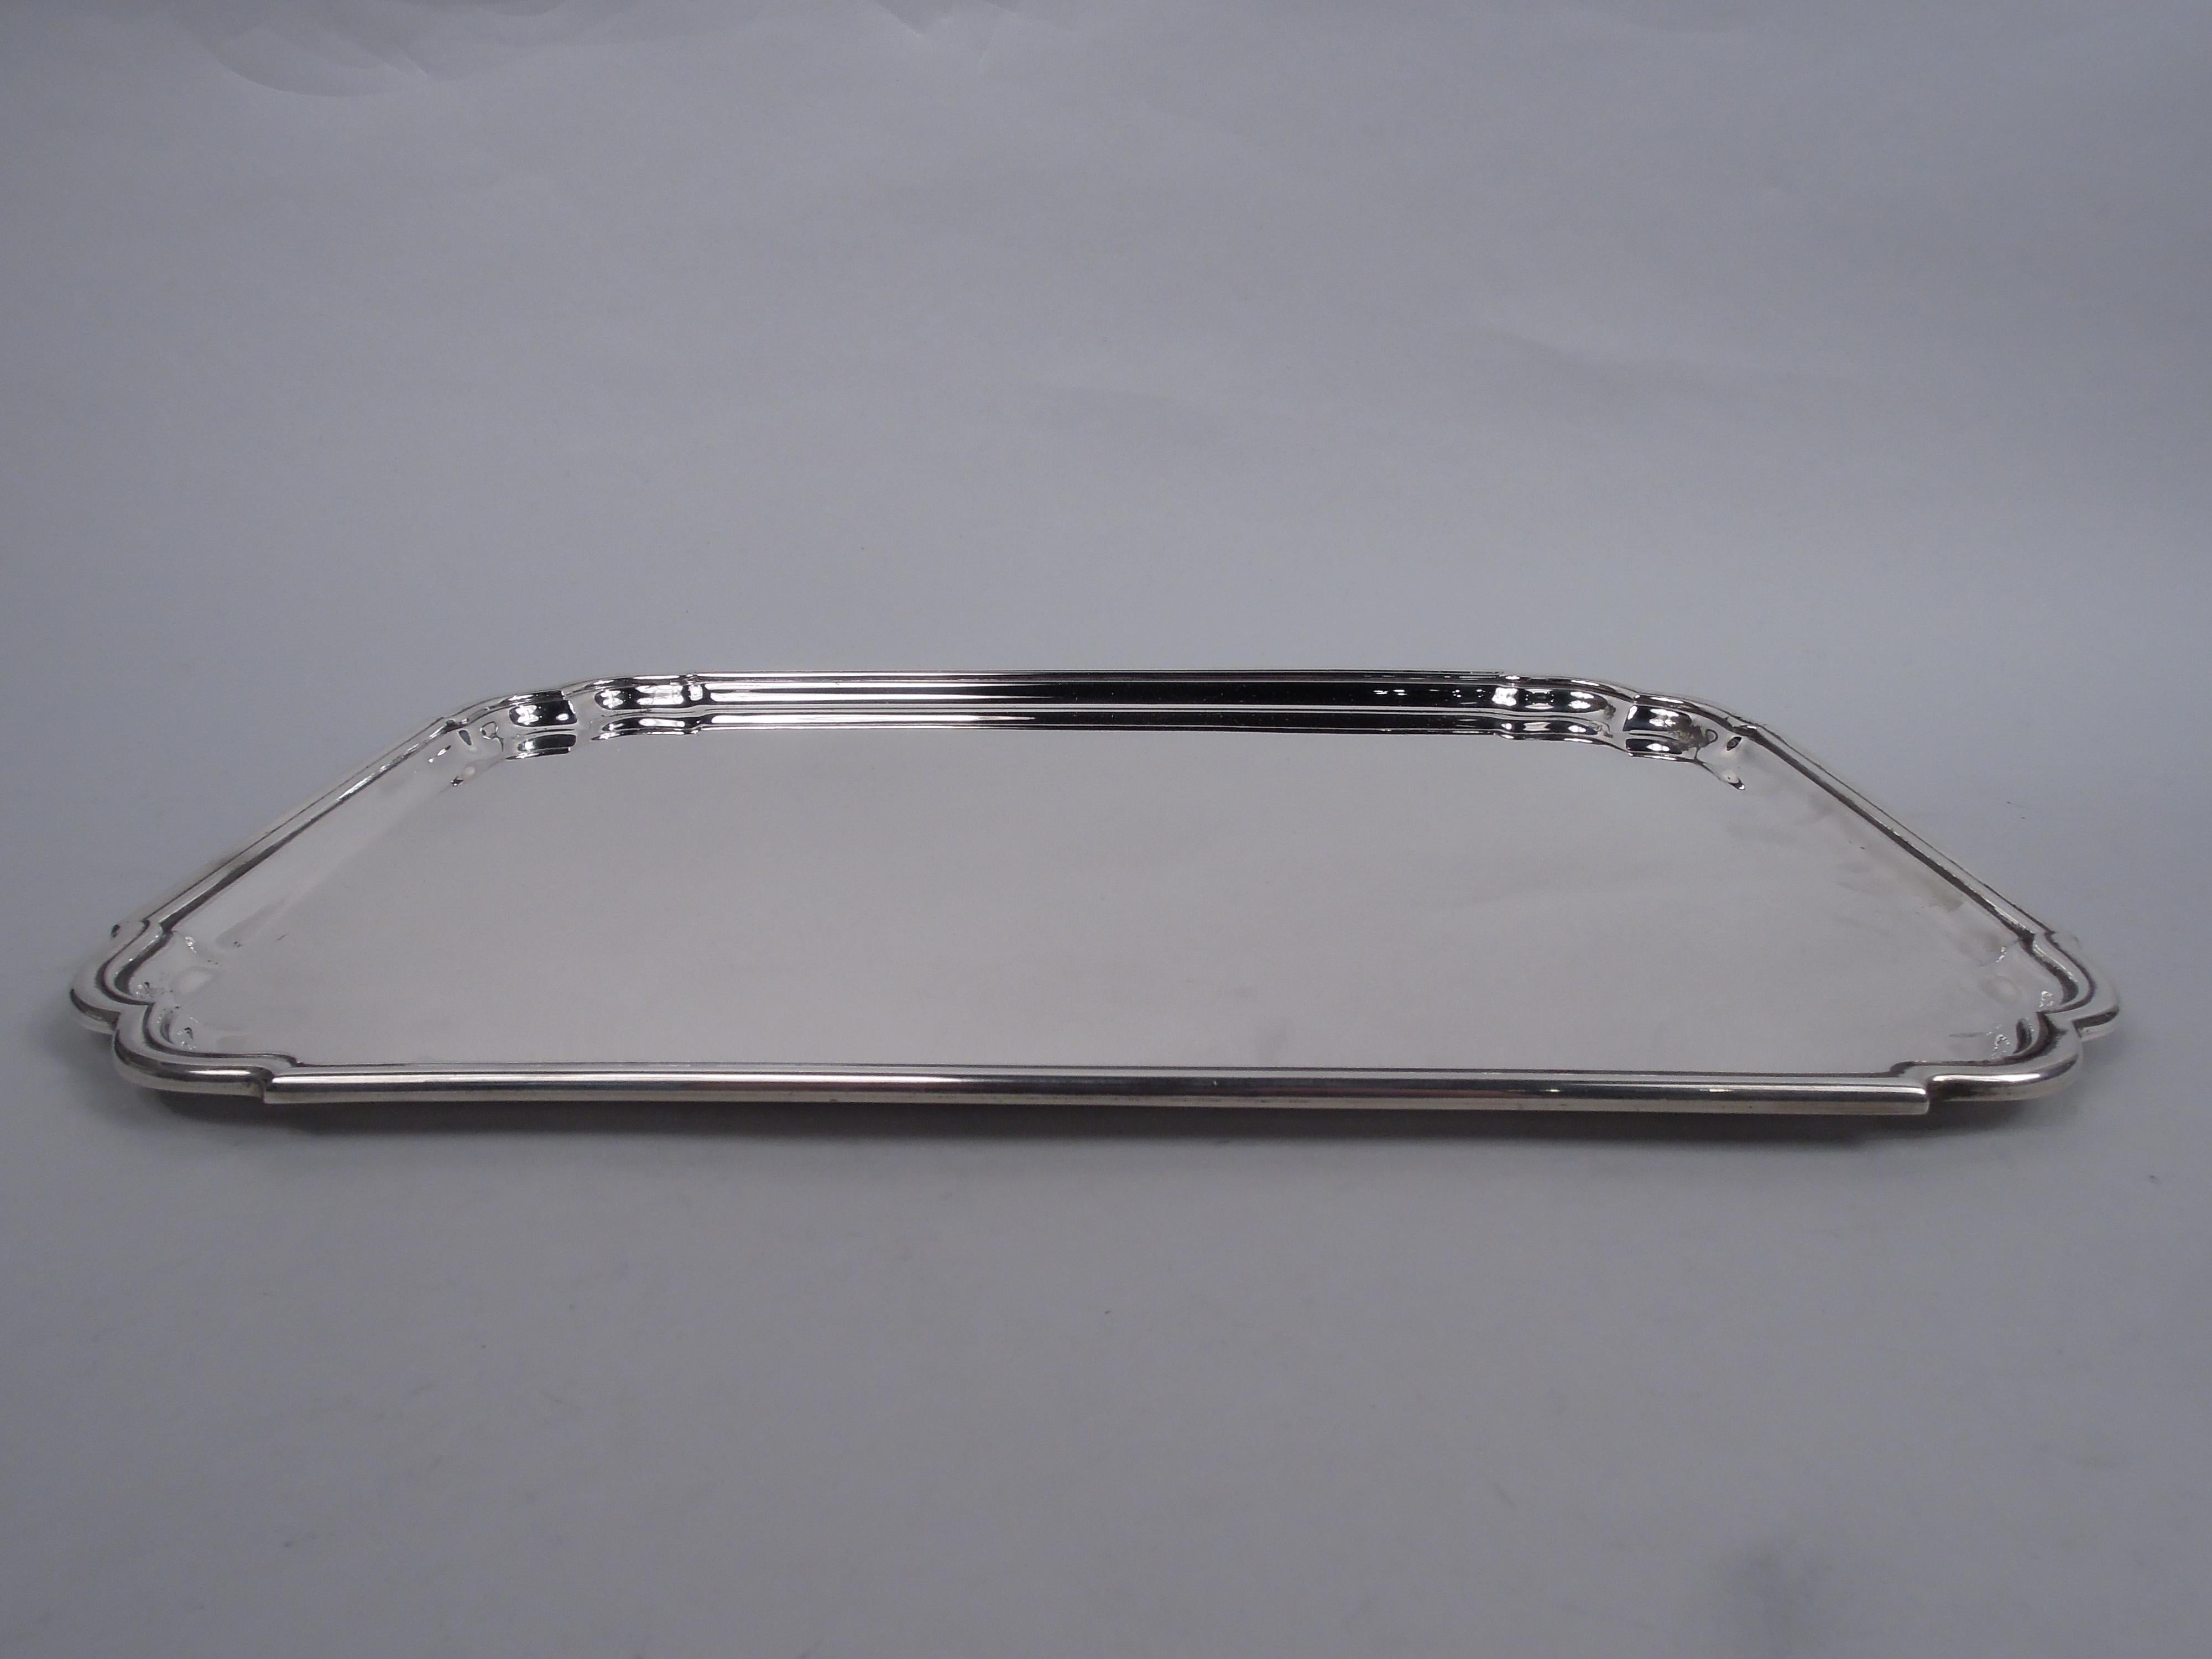 Georgian-inspired sterling silver tray. Made by Tiffany & Co. in New York. Rectangular with molded rim and double c-scroll corners. A great midcentury take on 18th-century design. Fully marked including maker’s stamp and postwar pattern no. 23967.